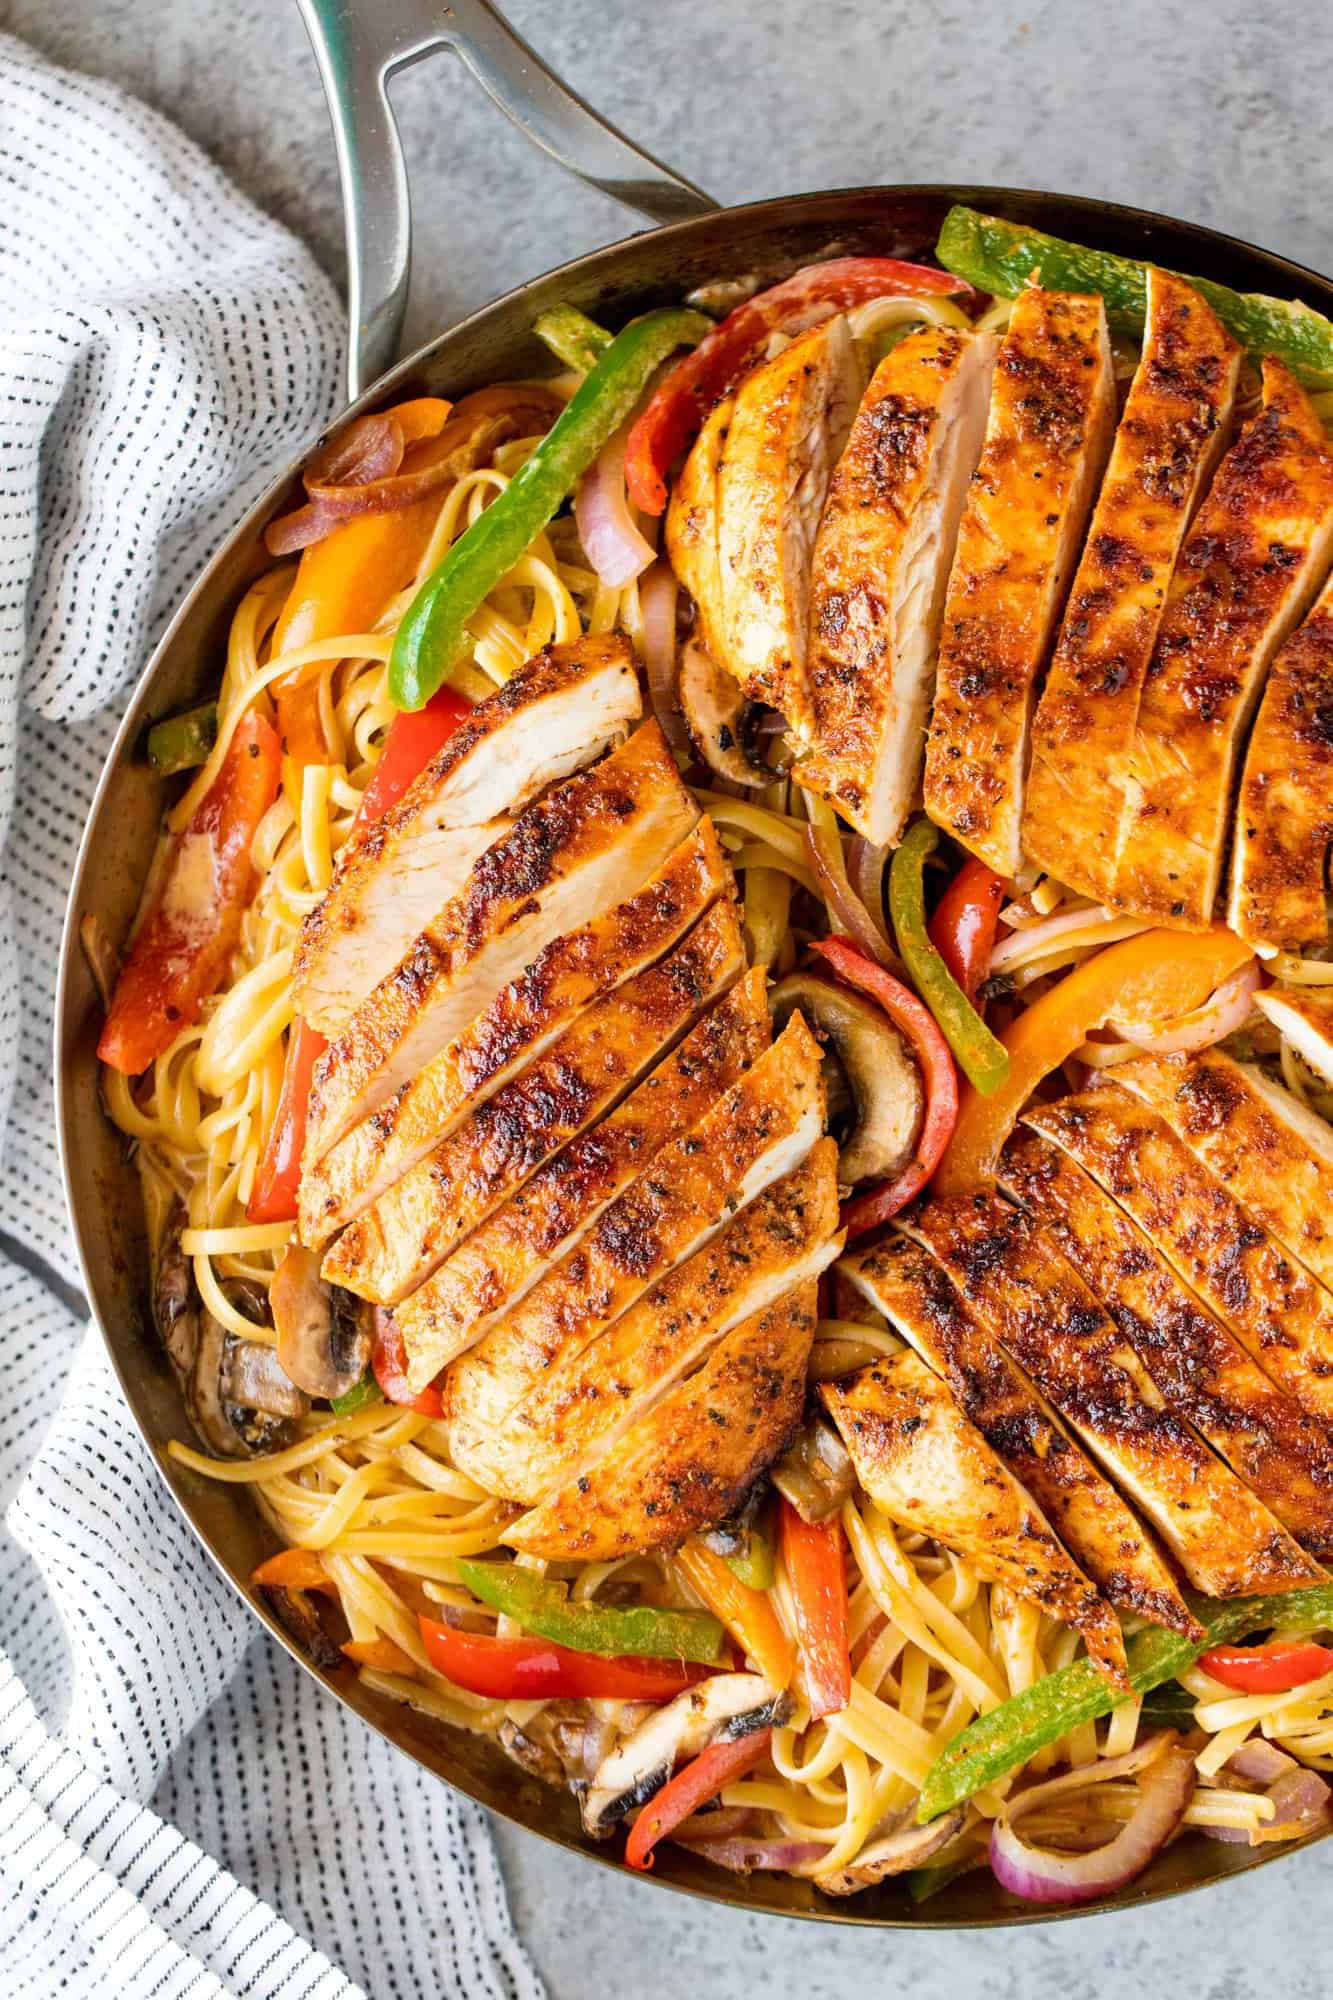 Cajun spiced chicken breasts sliced and served on a bed of linguini with grilled bell peppers, mushrooms and red onion in a skillet